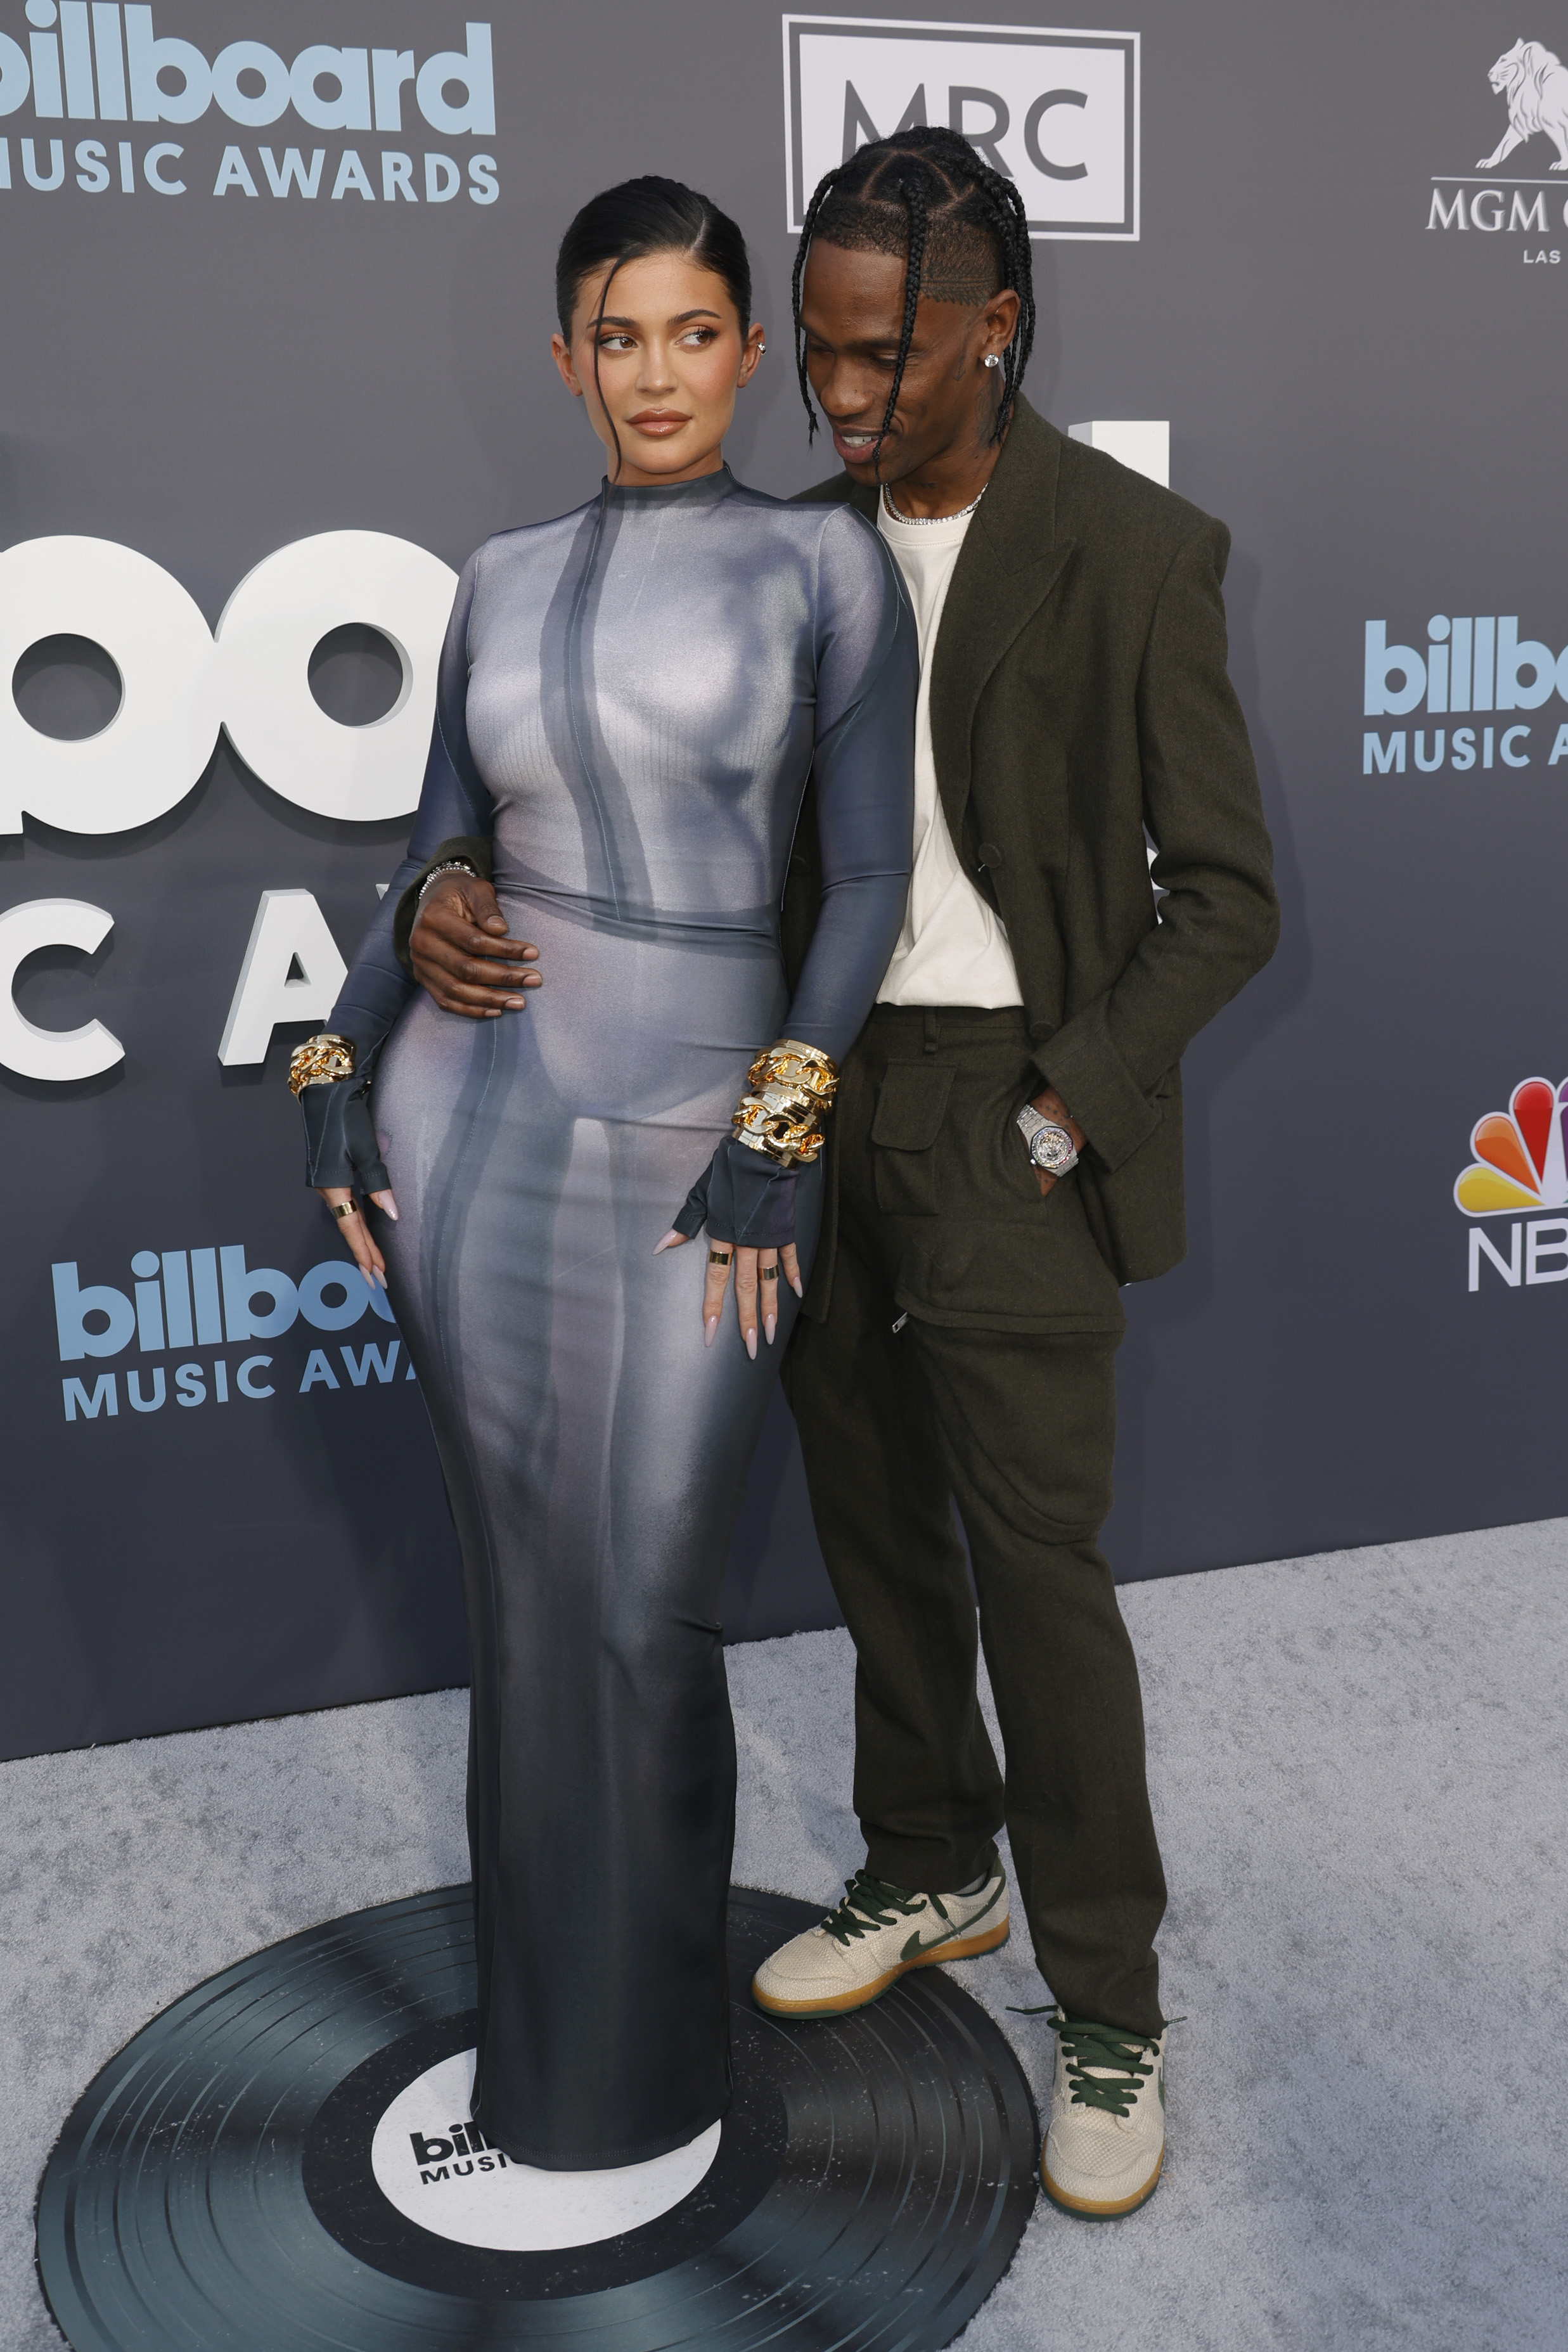 Kylie and Travis pose together on the red carpet for photographers at the Billboard Music Awards